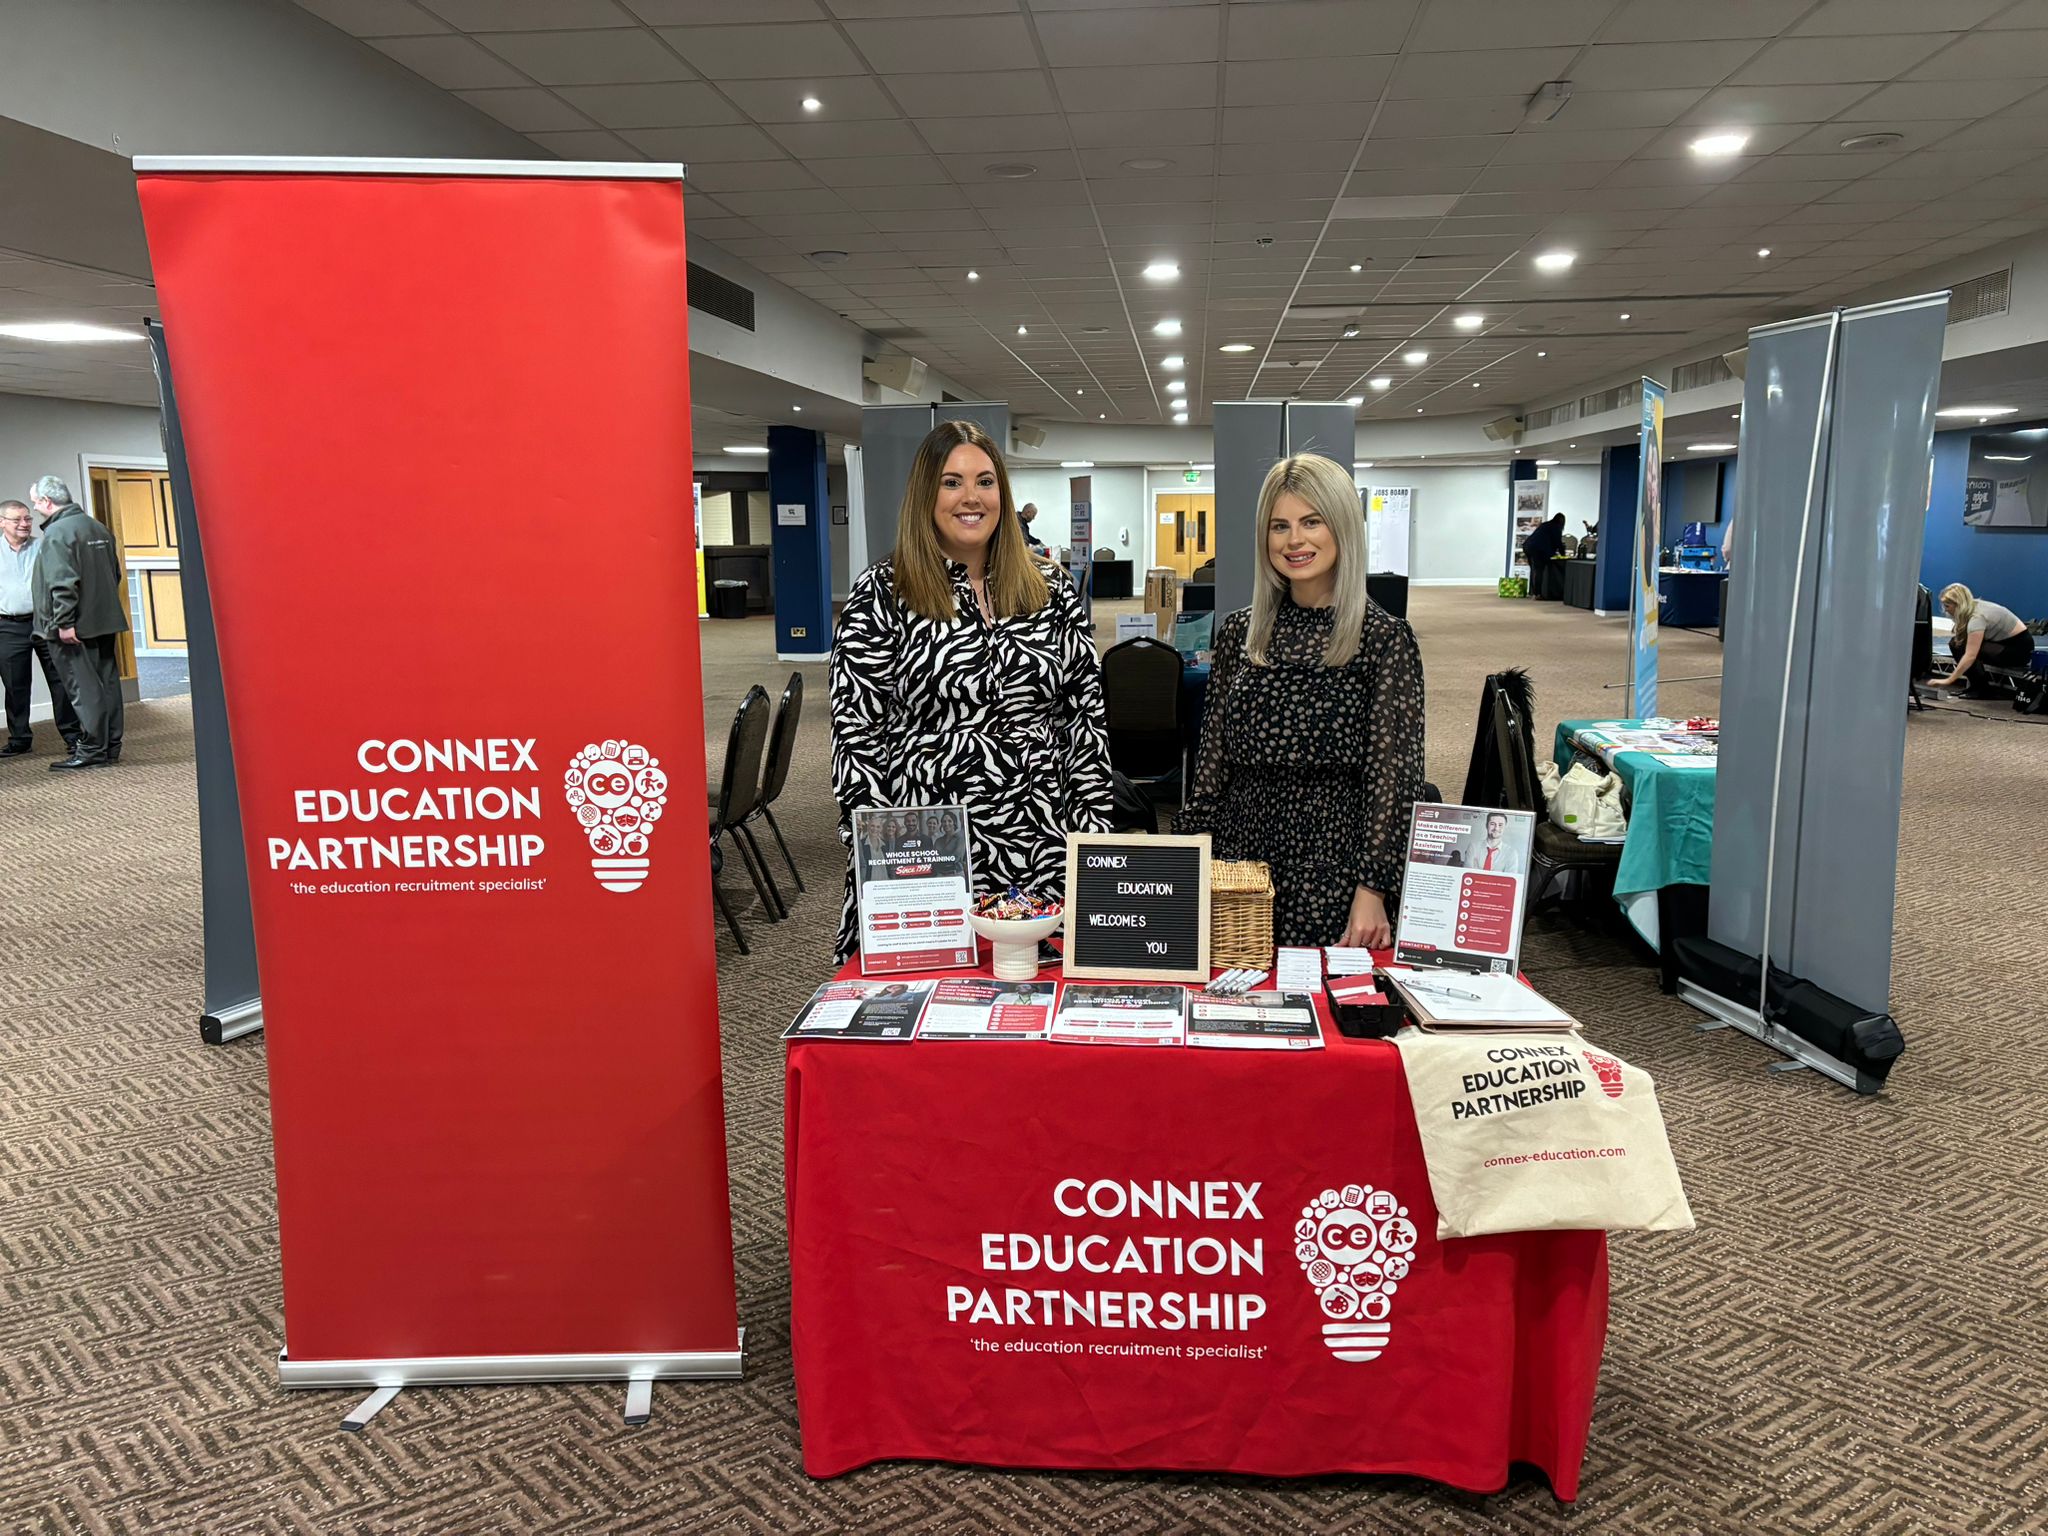 Connex Education at our event in Wigan